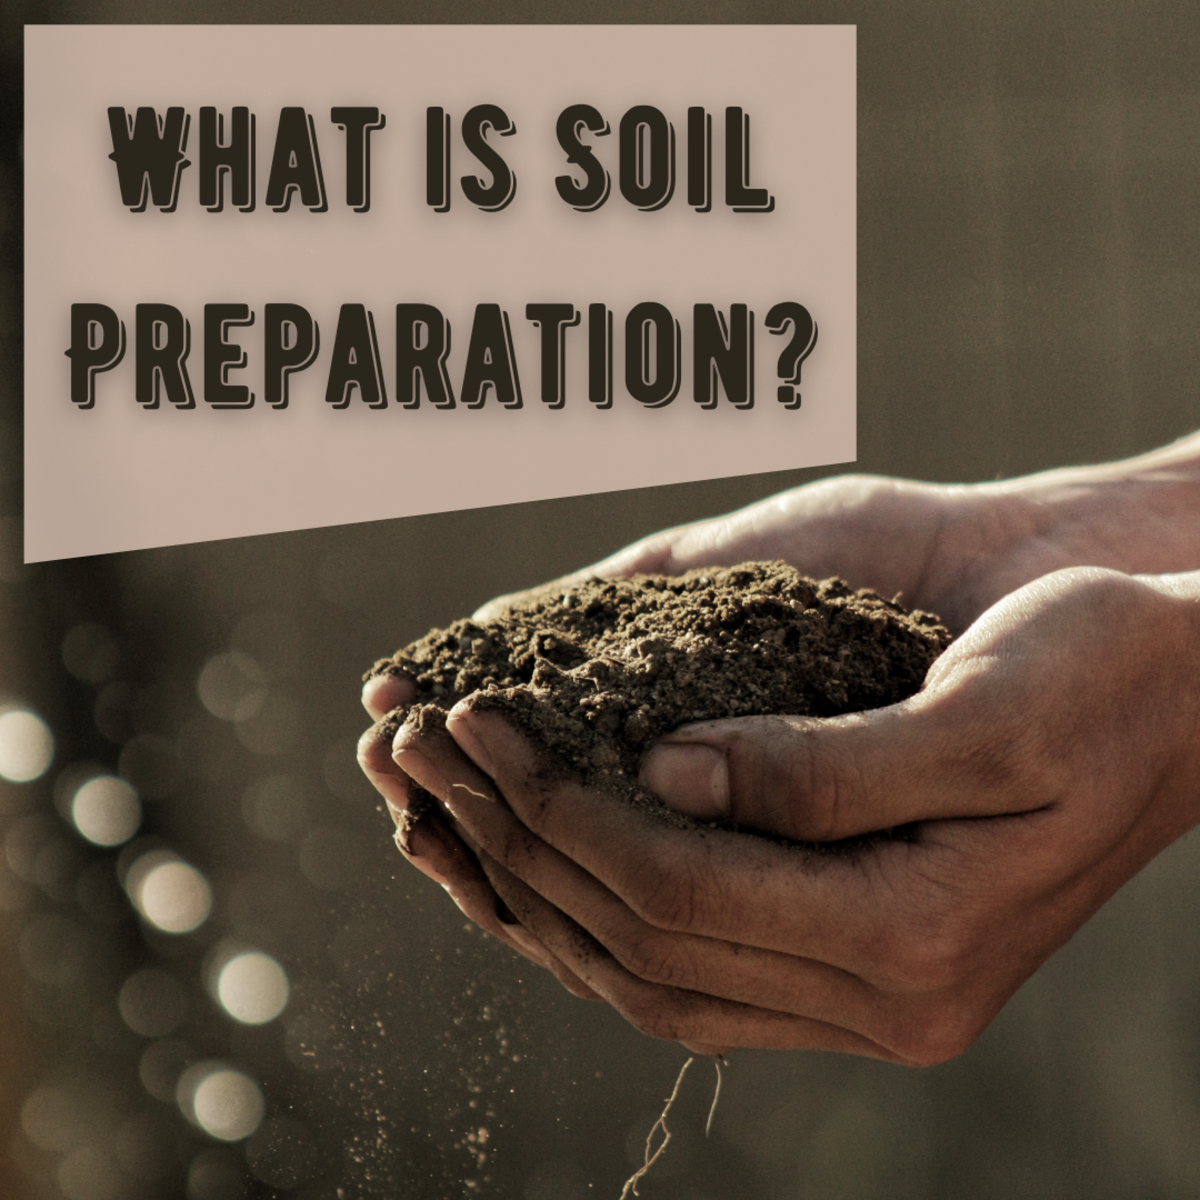 Learn everything you need to know about testing and preparing your soil for gardening